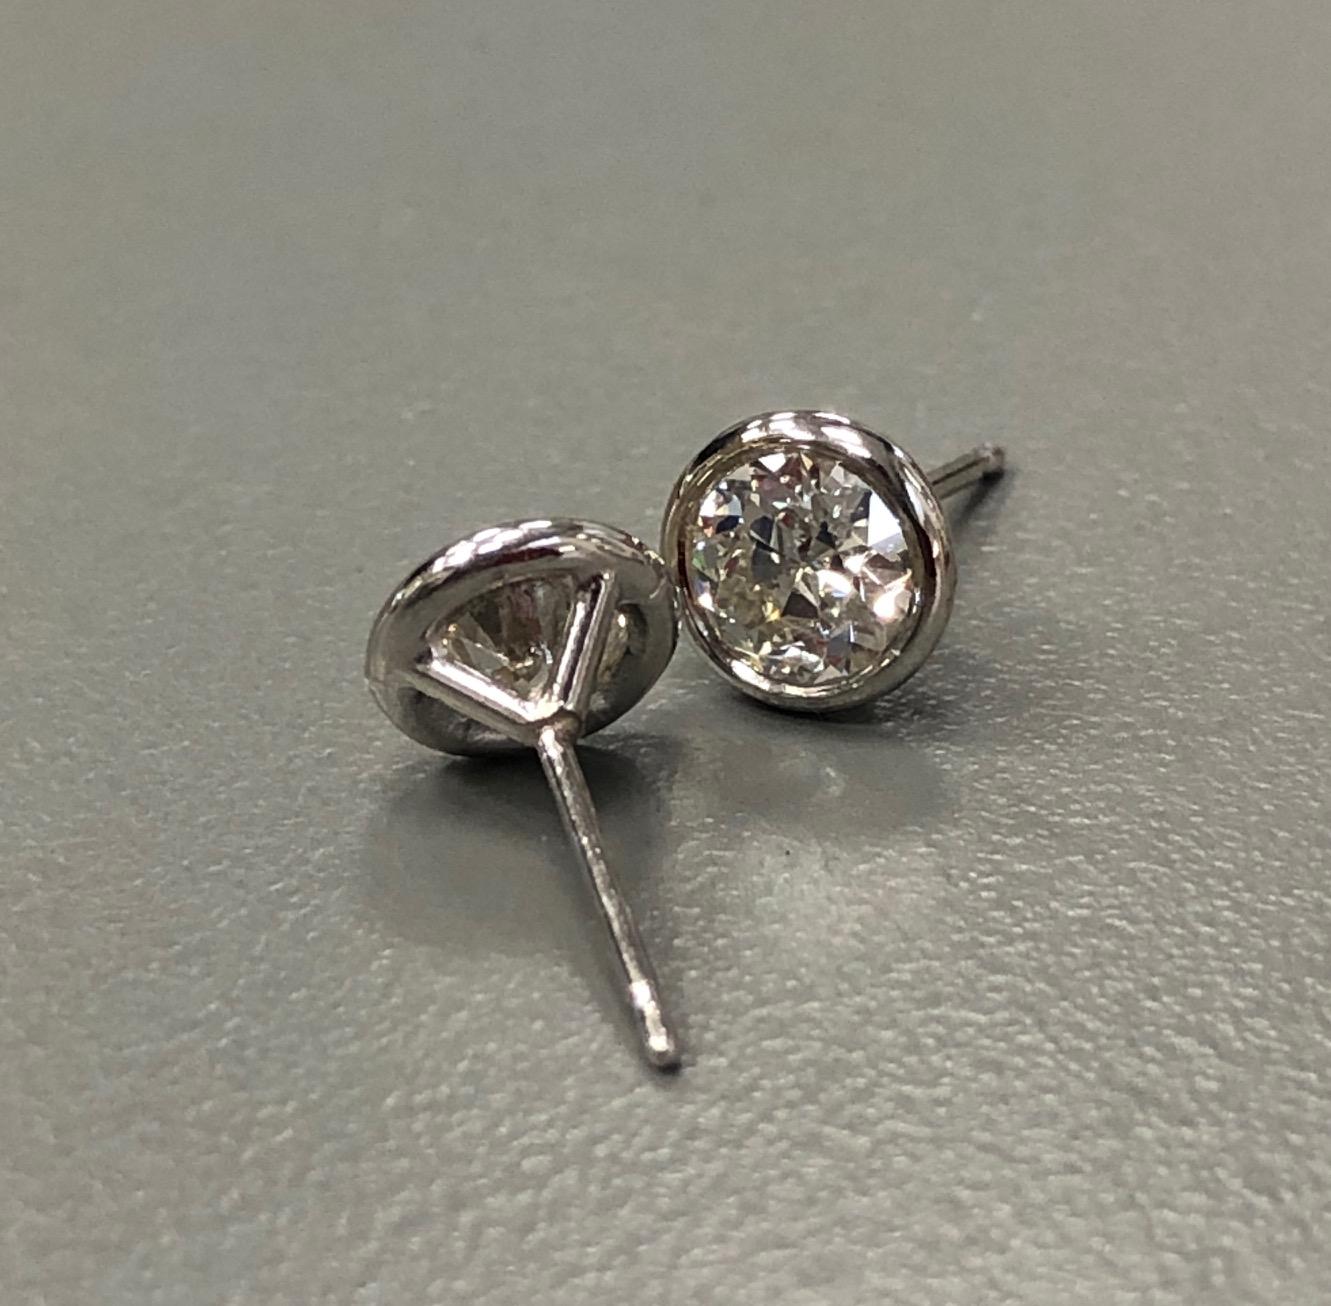 The 14 Karat white gold bezel set diamond stud earrings, weighing 1.04 carat in total, are centered on 2 transitional circular cut diamonds H-I Color SI2-VS2 Clarity. Evoking a vintage look, these are truly stunning. 